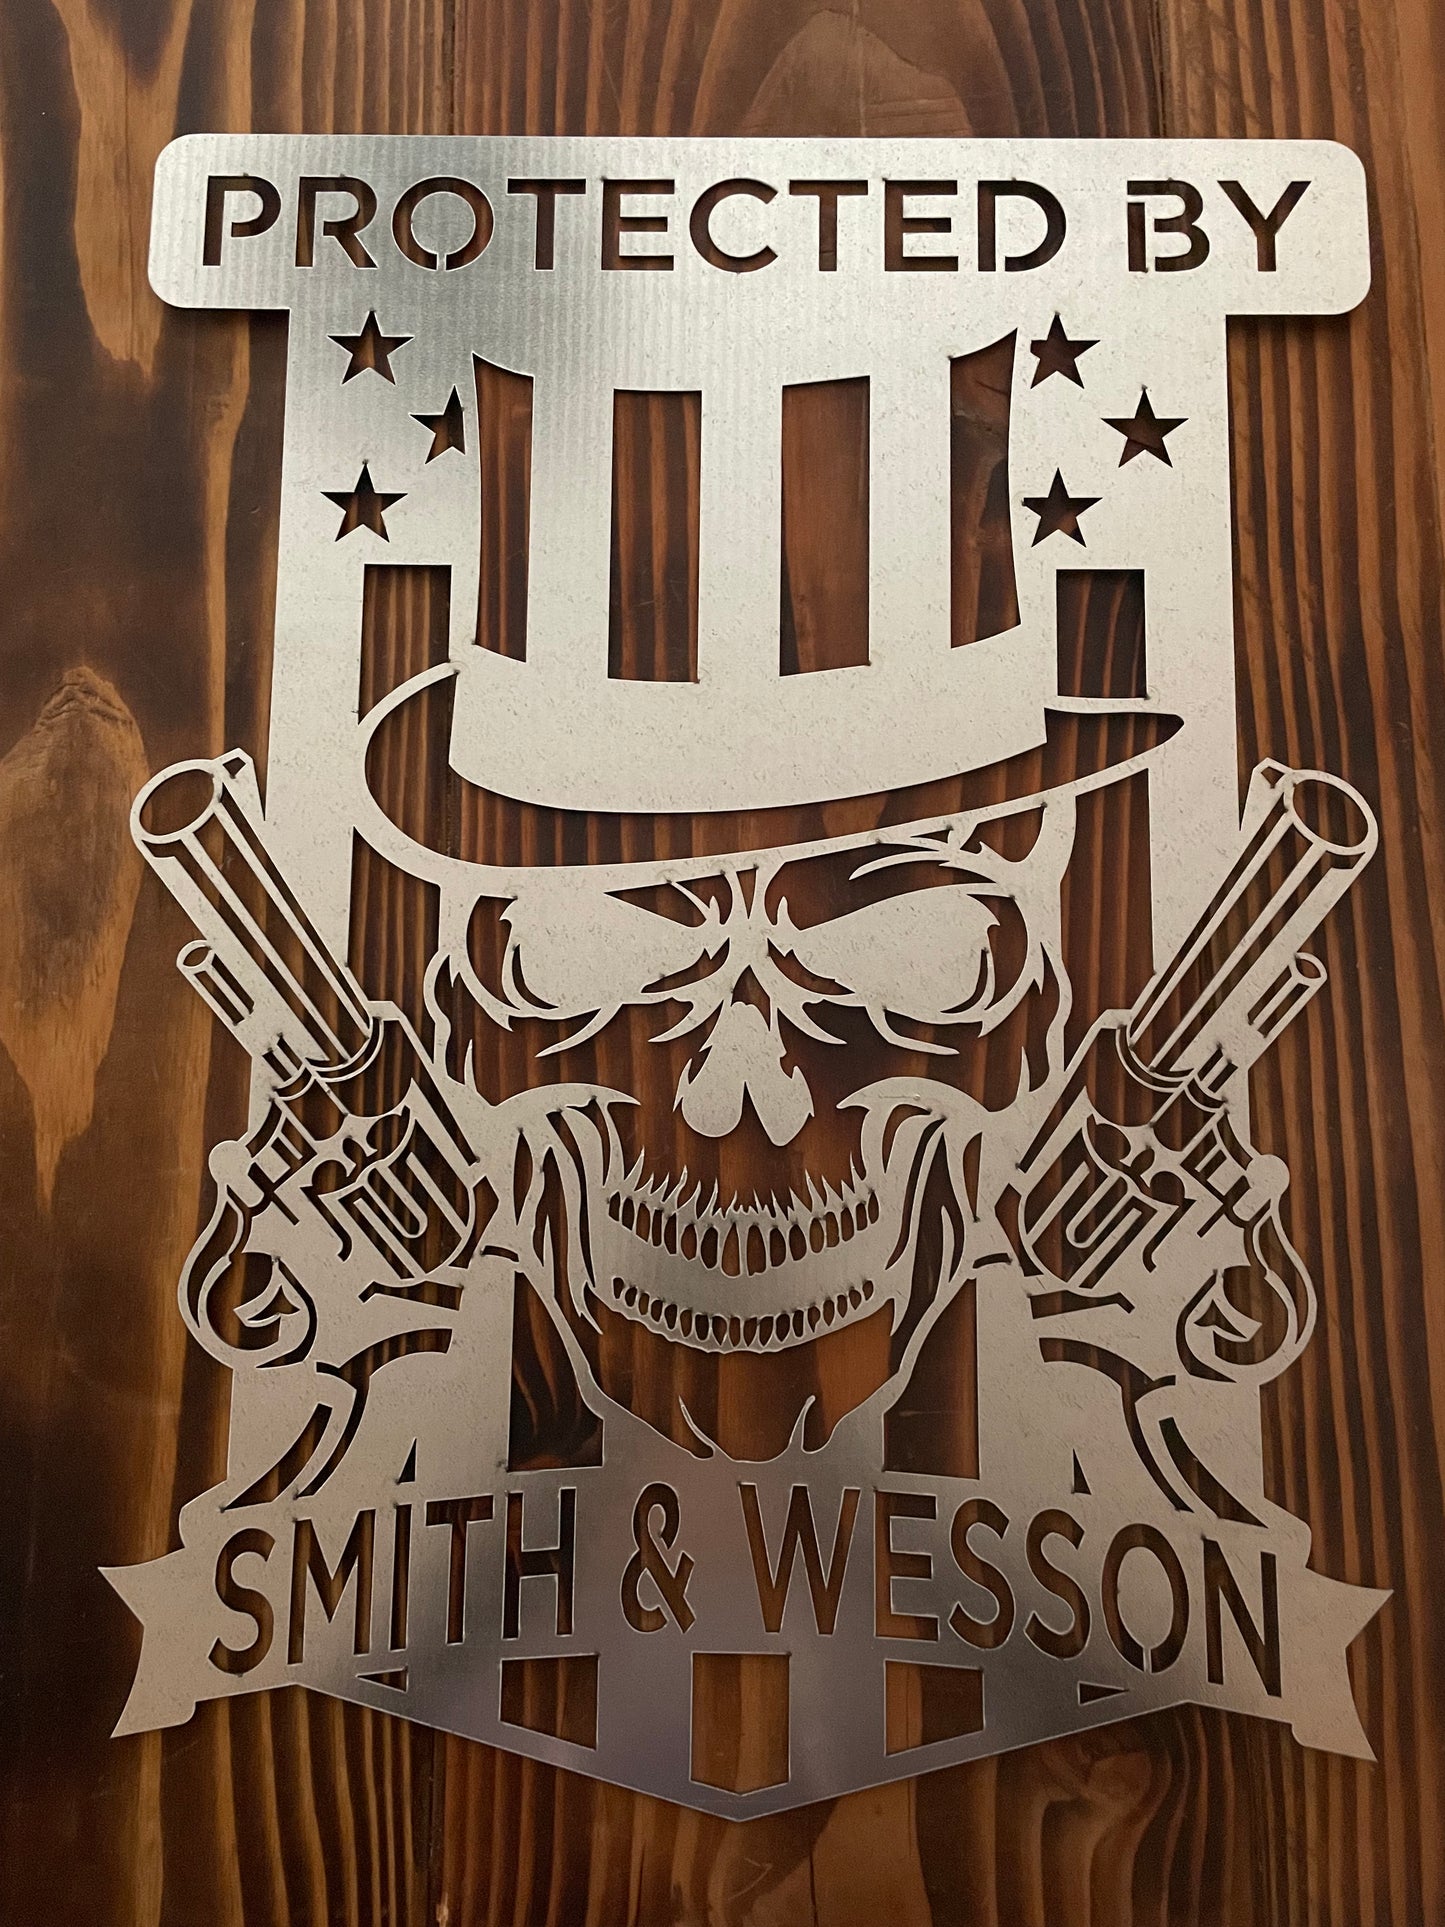 Protected by Smith & Wesson - Metal Art (Local pickup/delivery in NJ only)